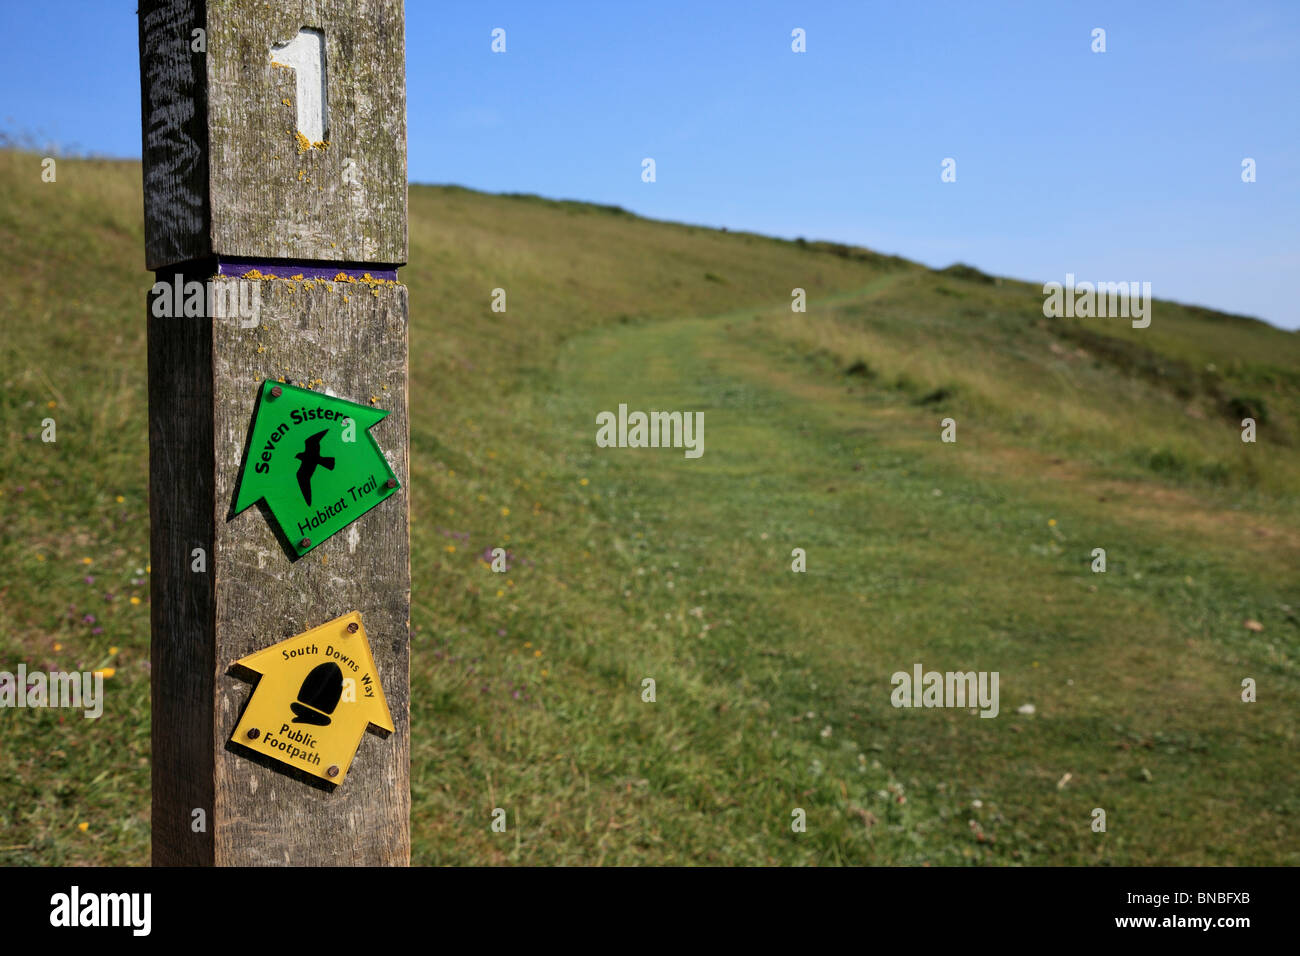 3256. South Downs Way, Seven Sisters Country Park, Cuckmere, East Sussex, UK Stock Photo